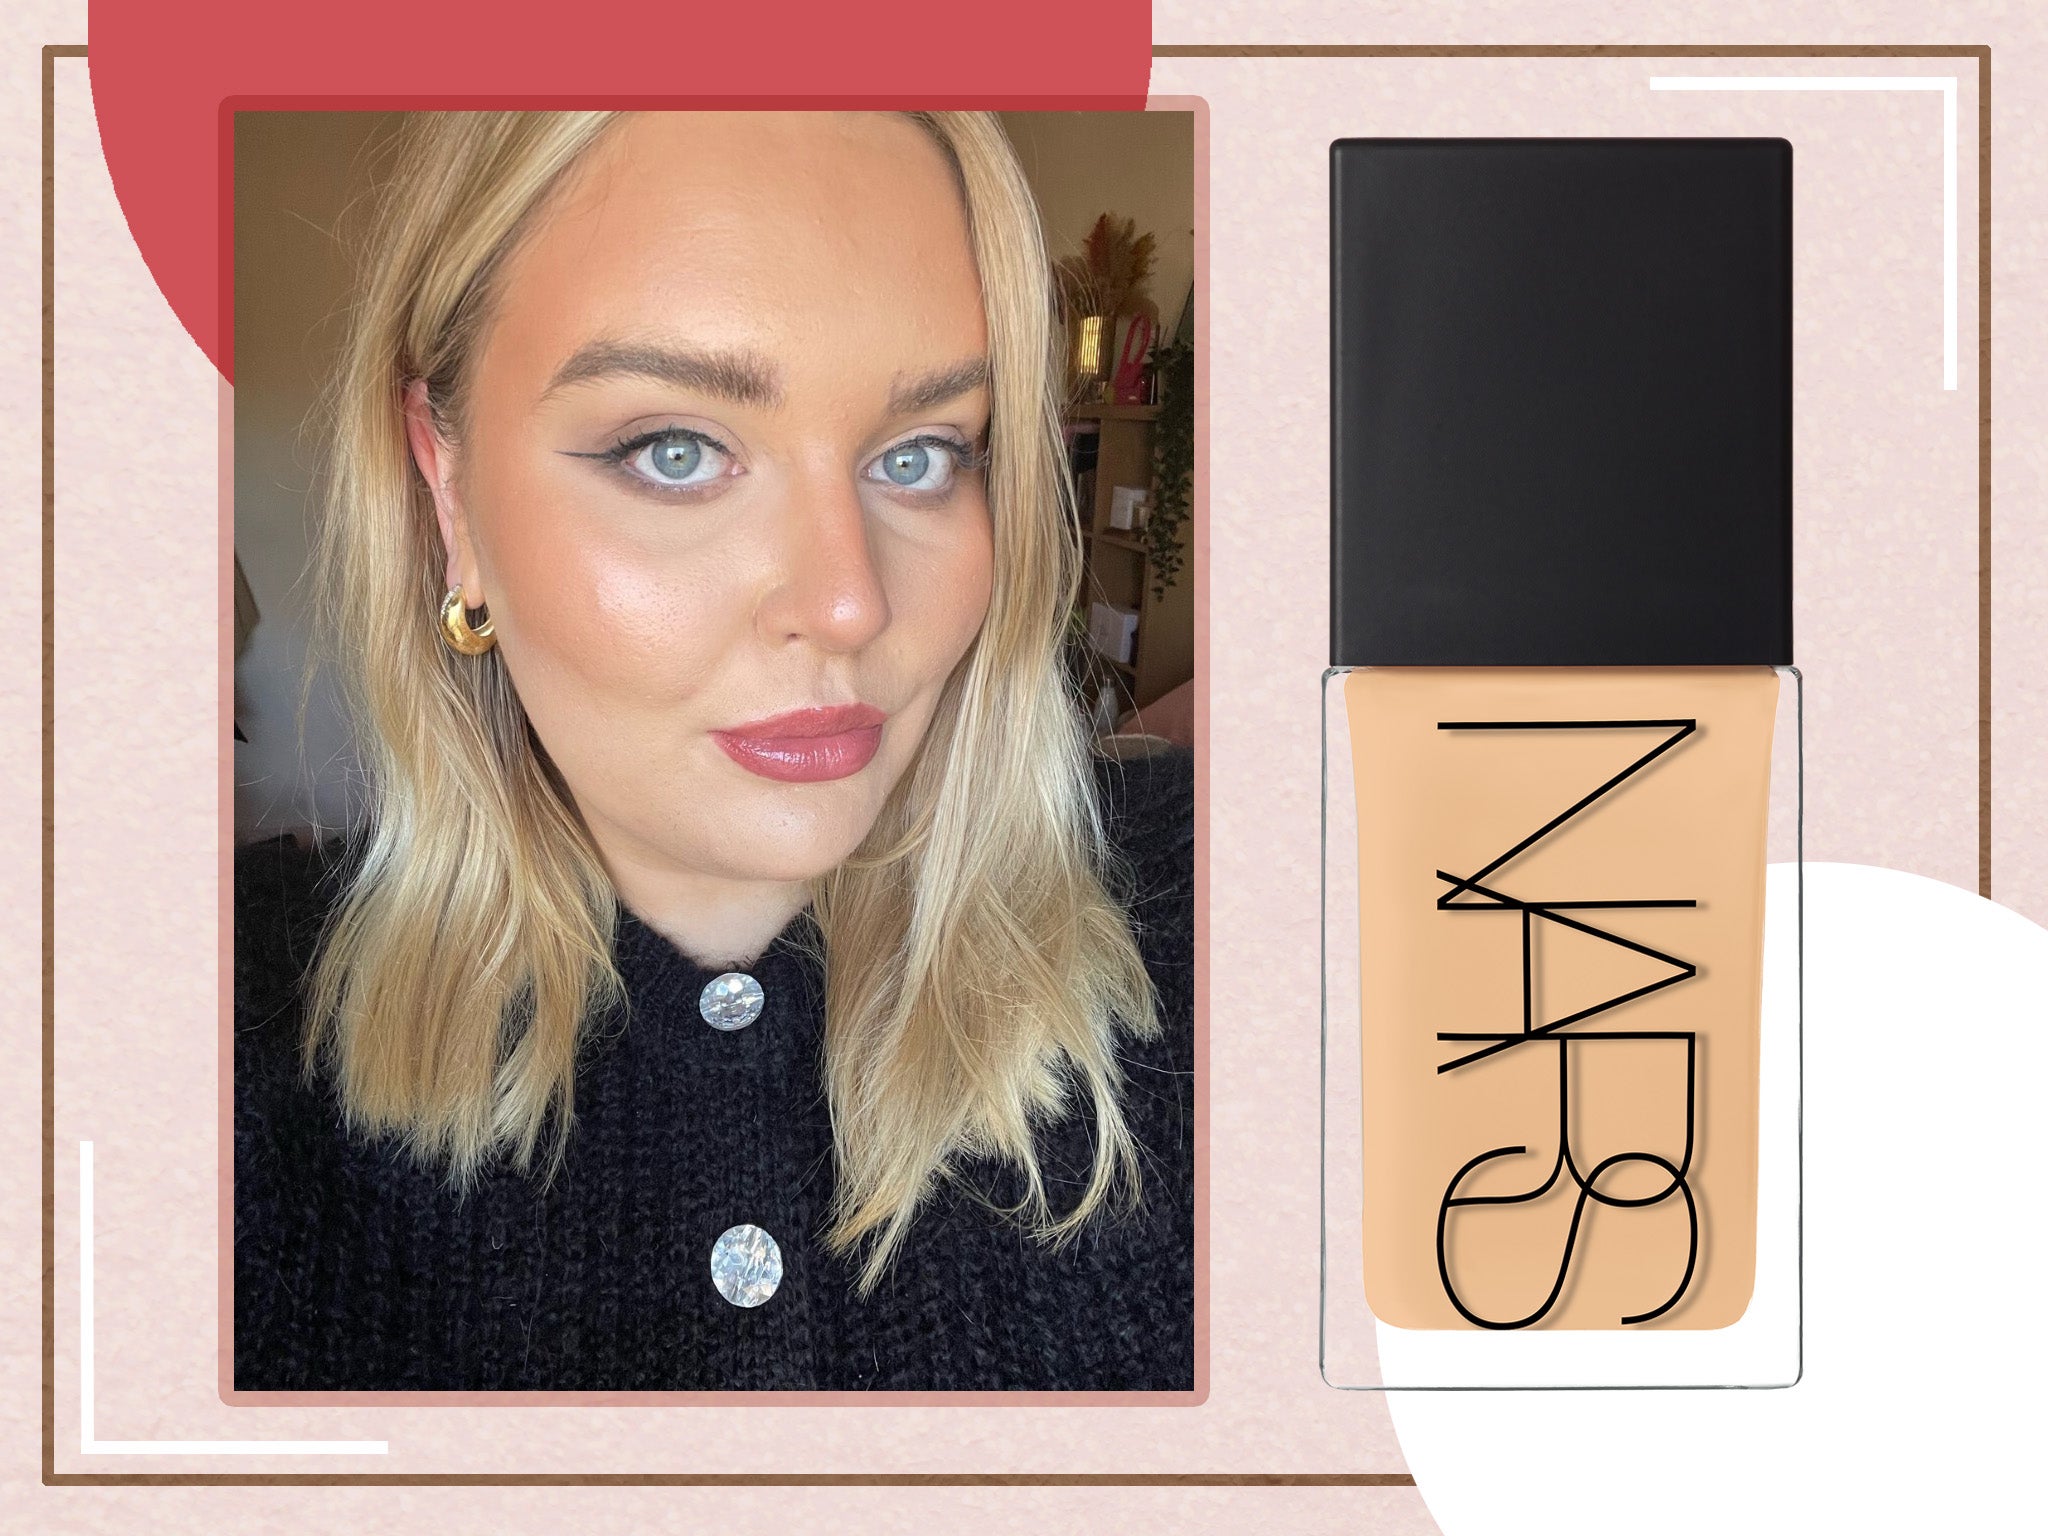 Nars light reflecting foundation review: A glowy finish that wears well